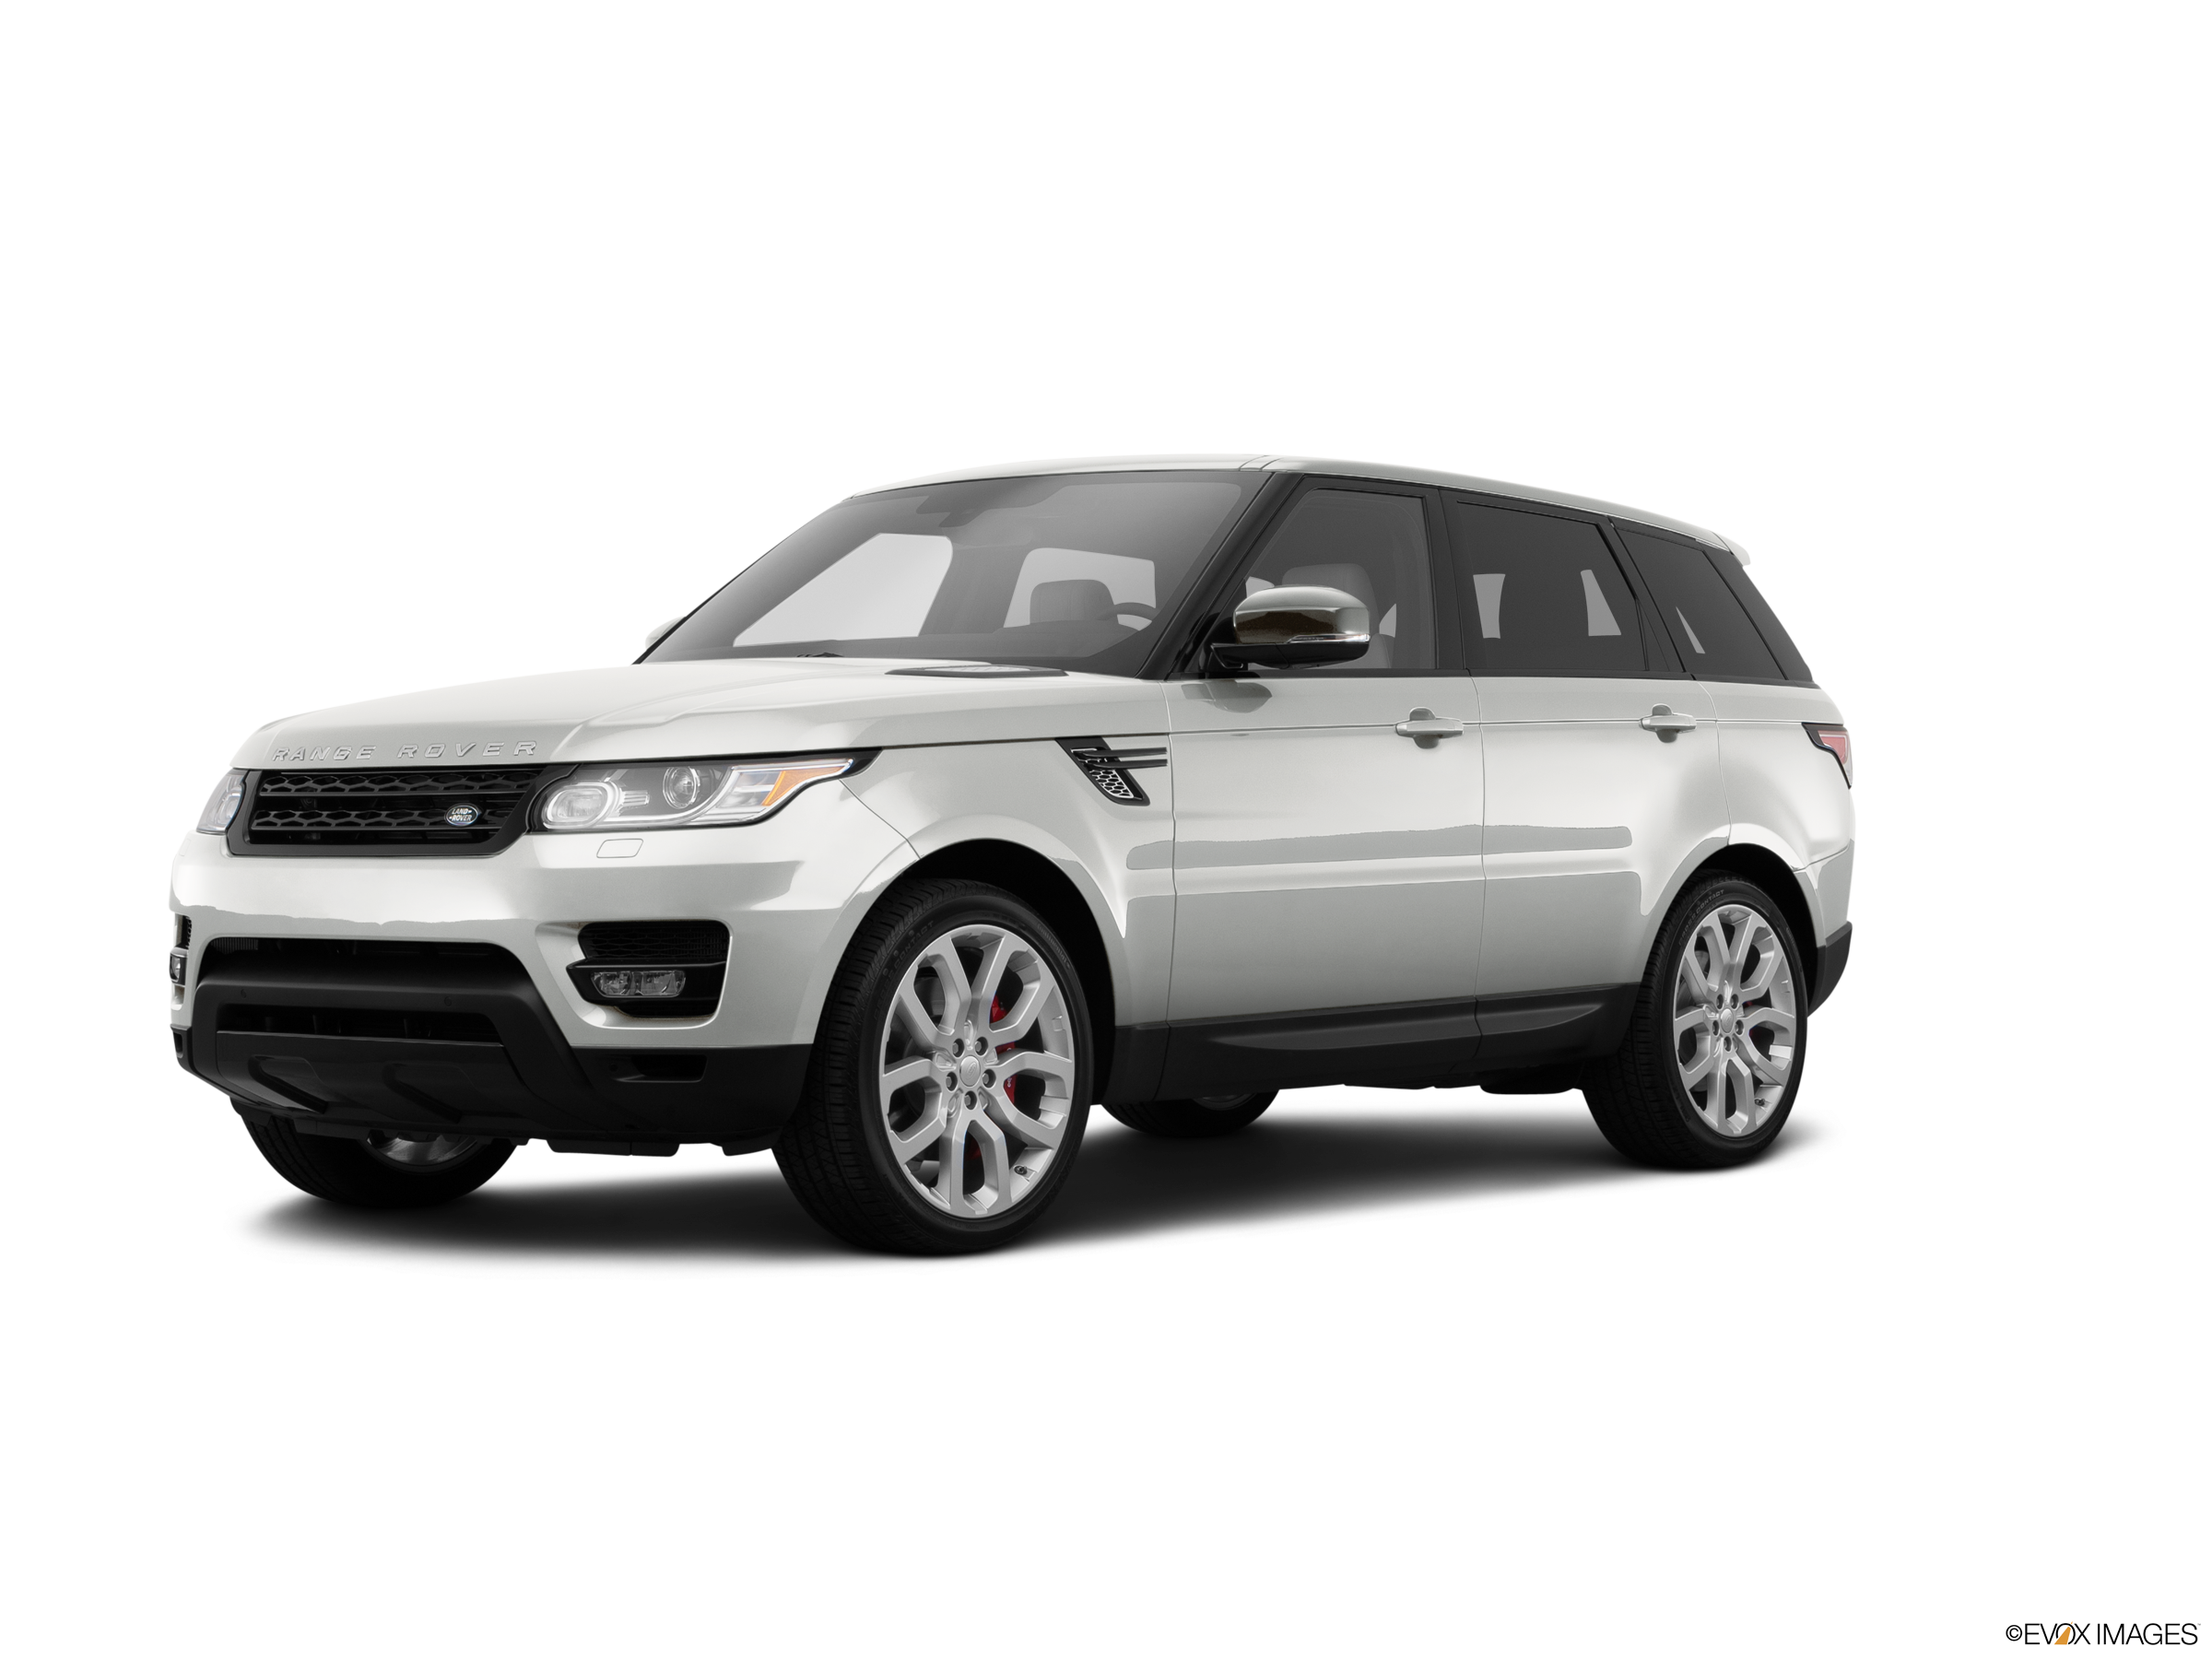 Used 2014 Land Rover Range Rover Sport HSE Sport Utility Prices | Kelley Blue Book